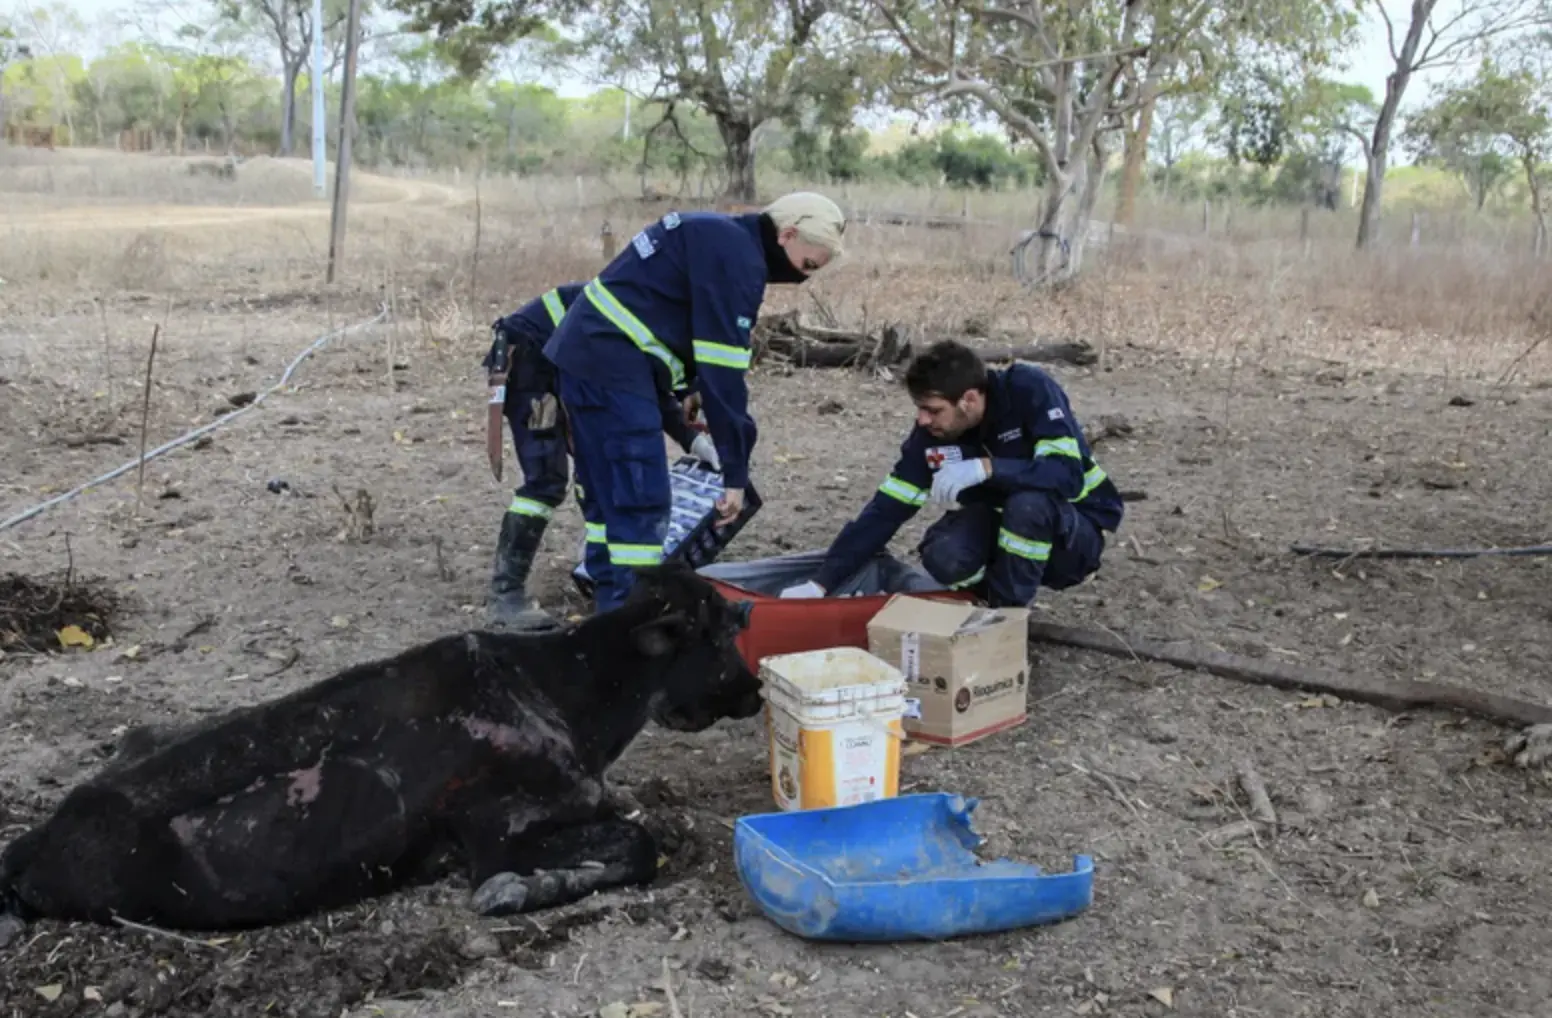 Vets try and save a cow that has sustained fire injuries 